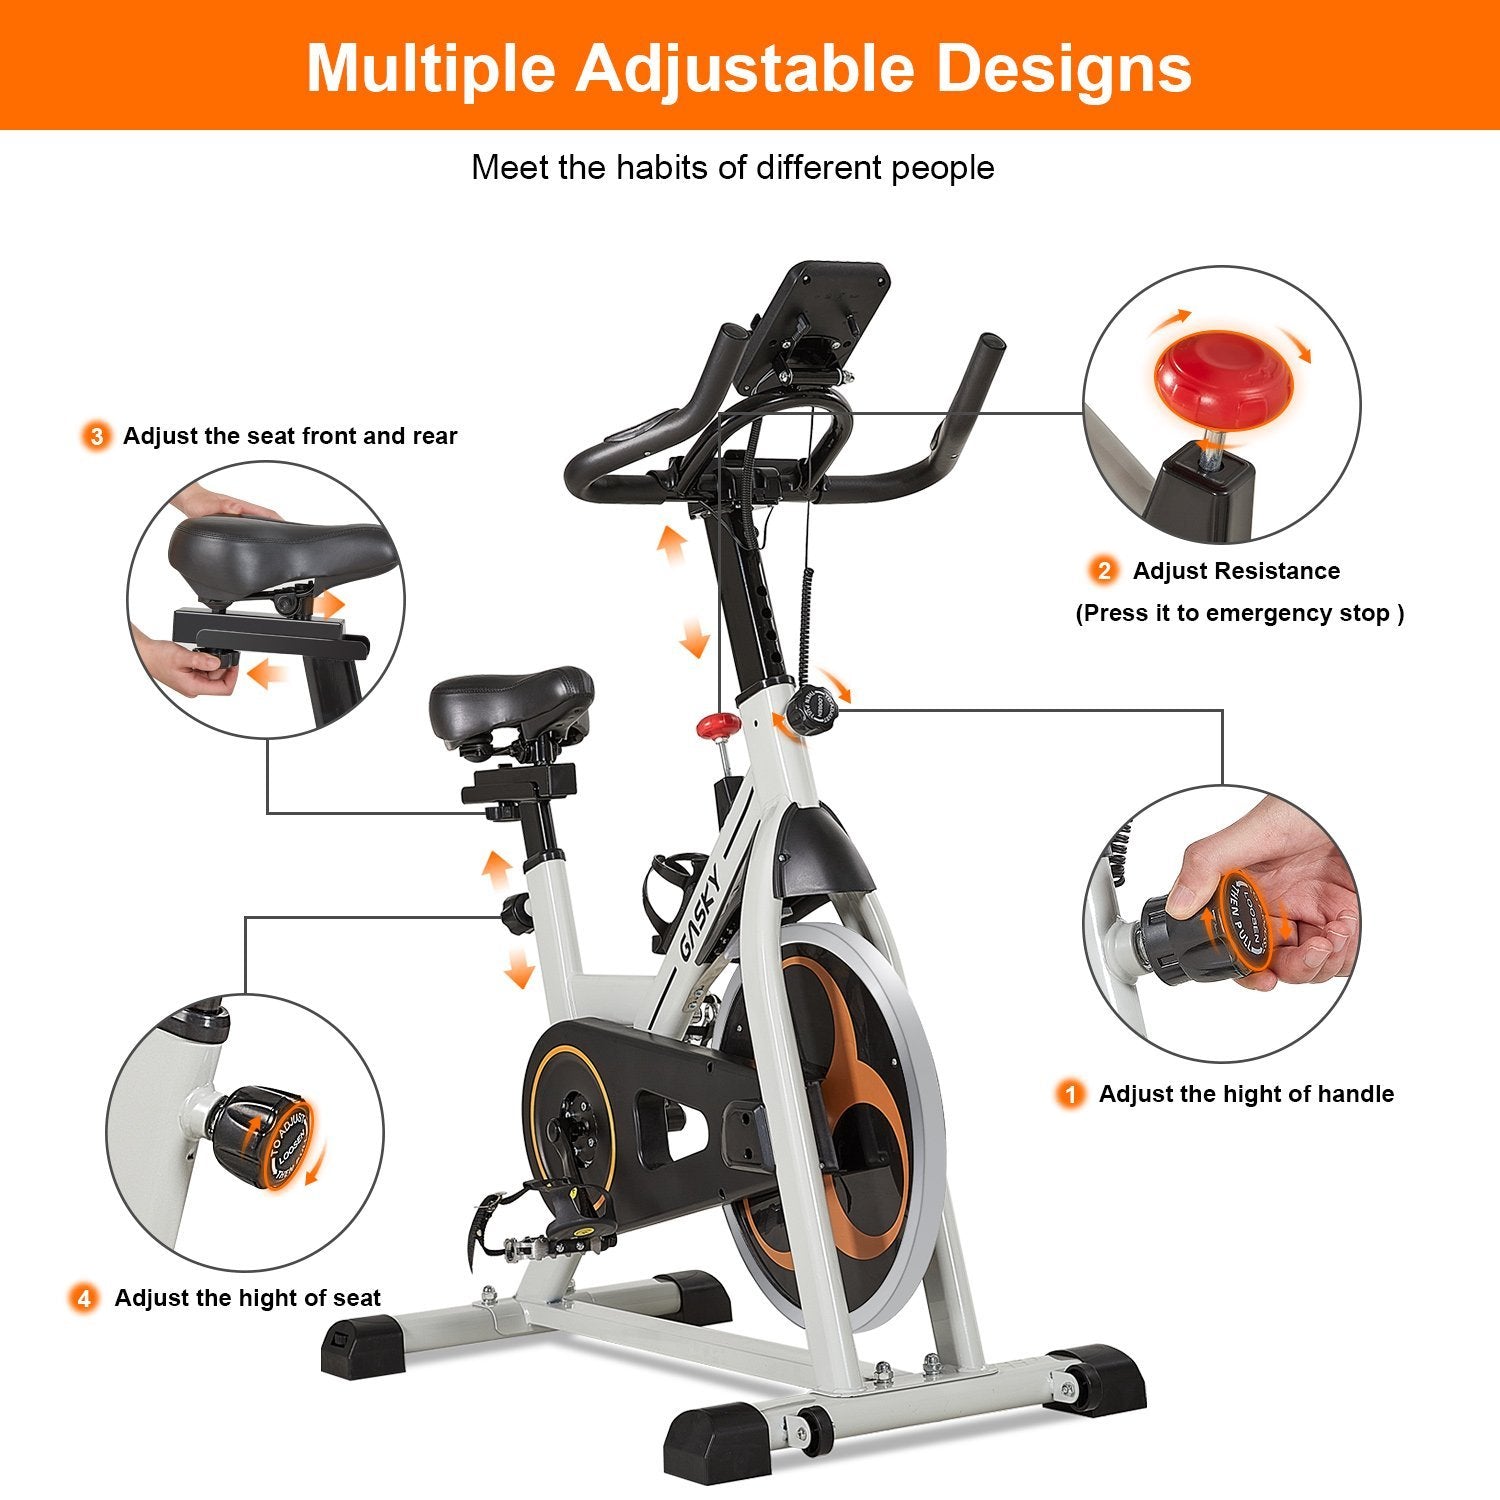 Load image into Gallery viewer, GASKY Indoor Exercise Bike Stationary Cycling Bike with LCD Monitor Tablet Holder, Comfortable Seat Cushion for Home Gym Office Use - NAIPO
